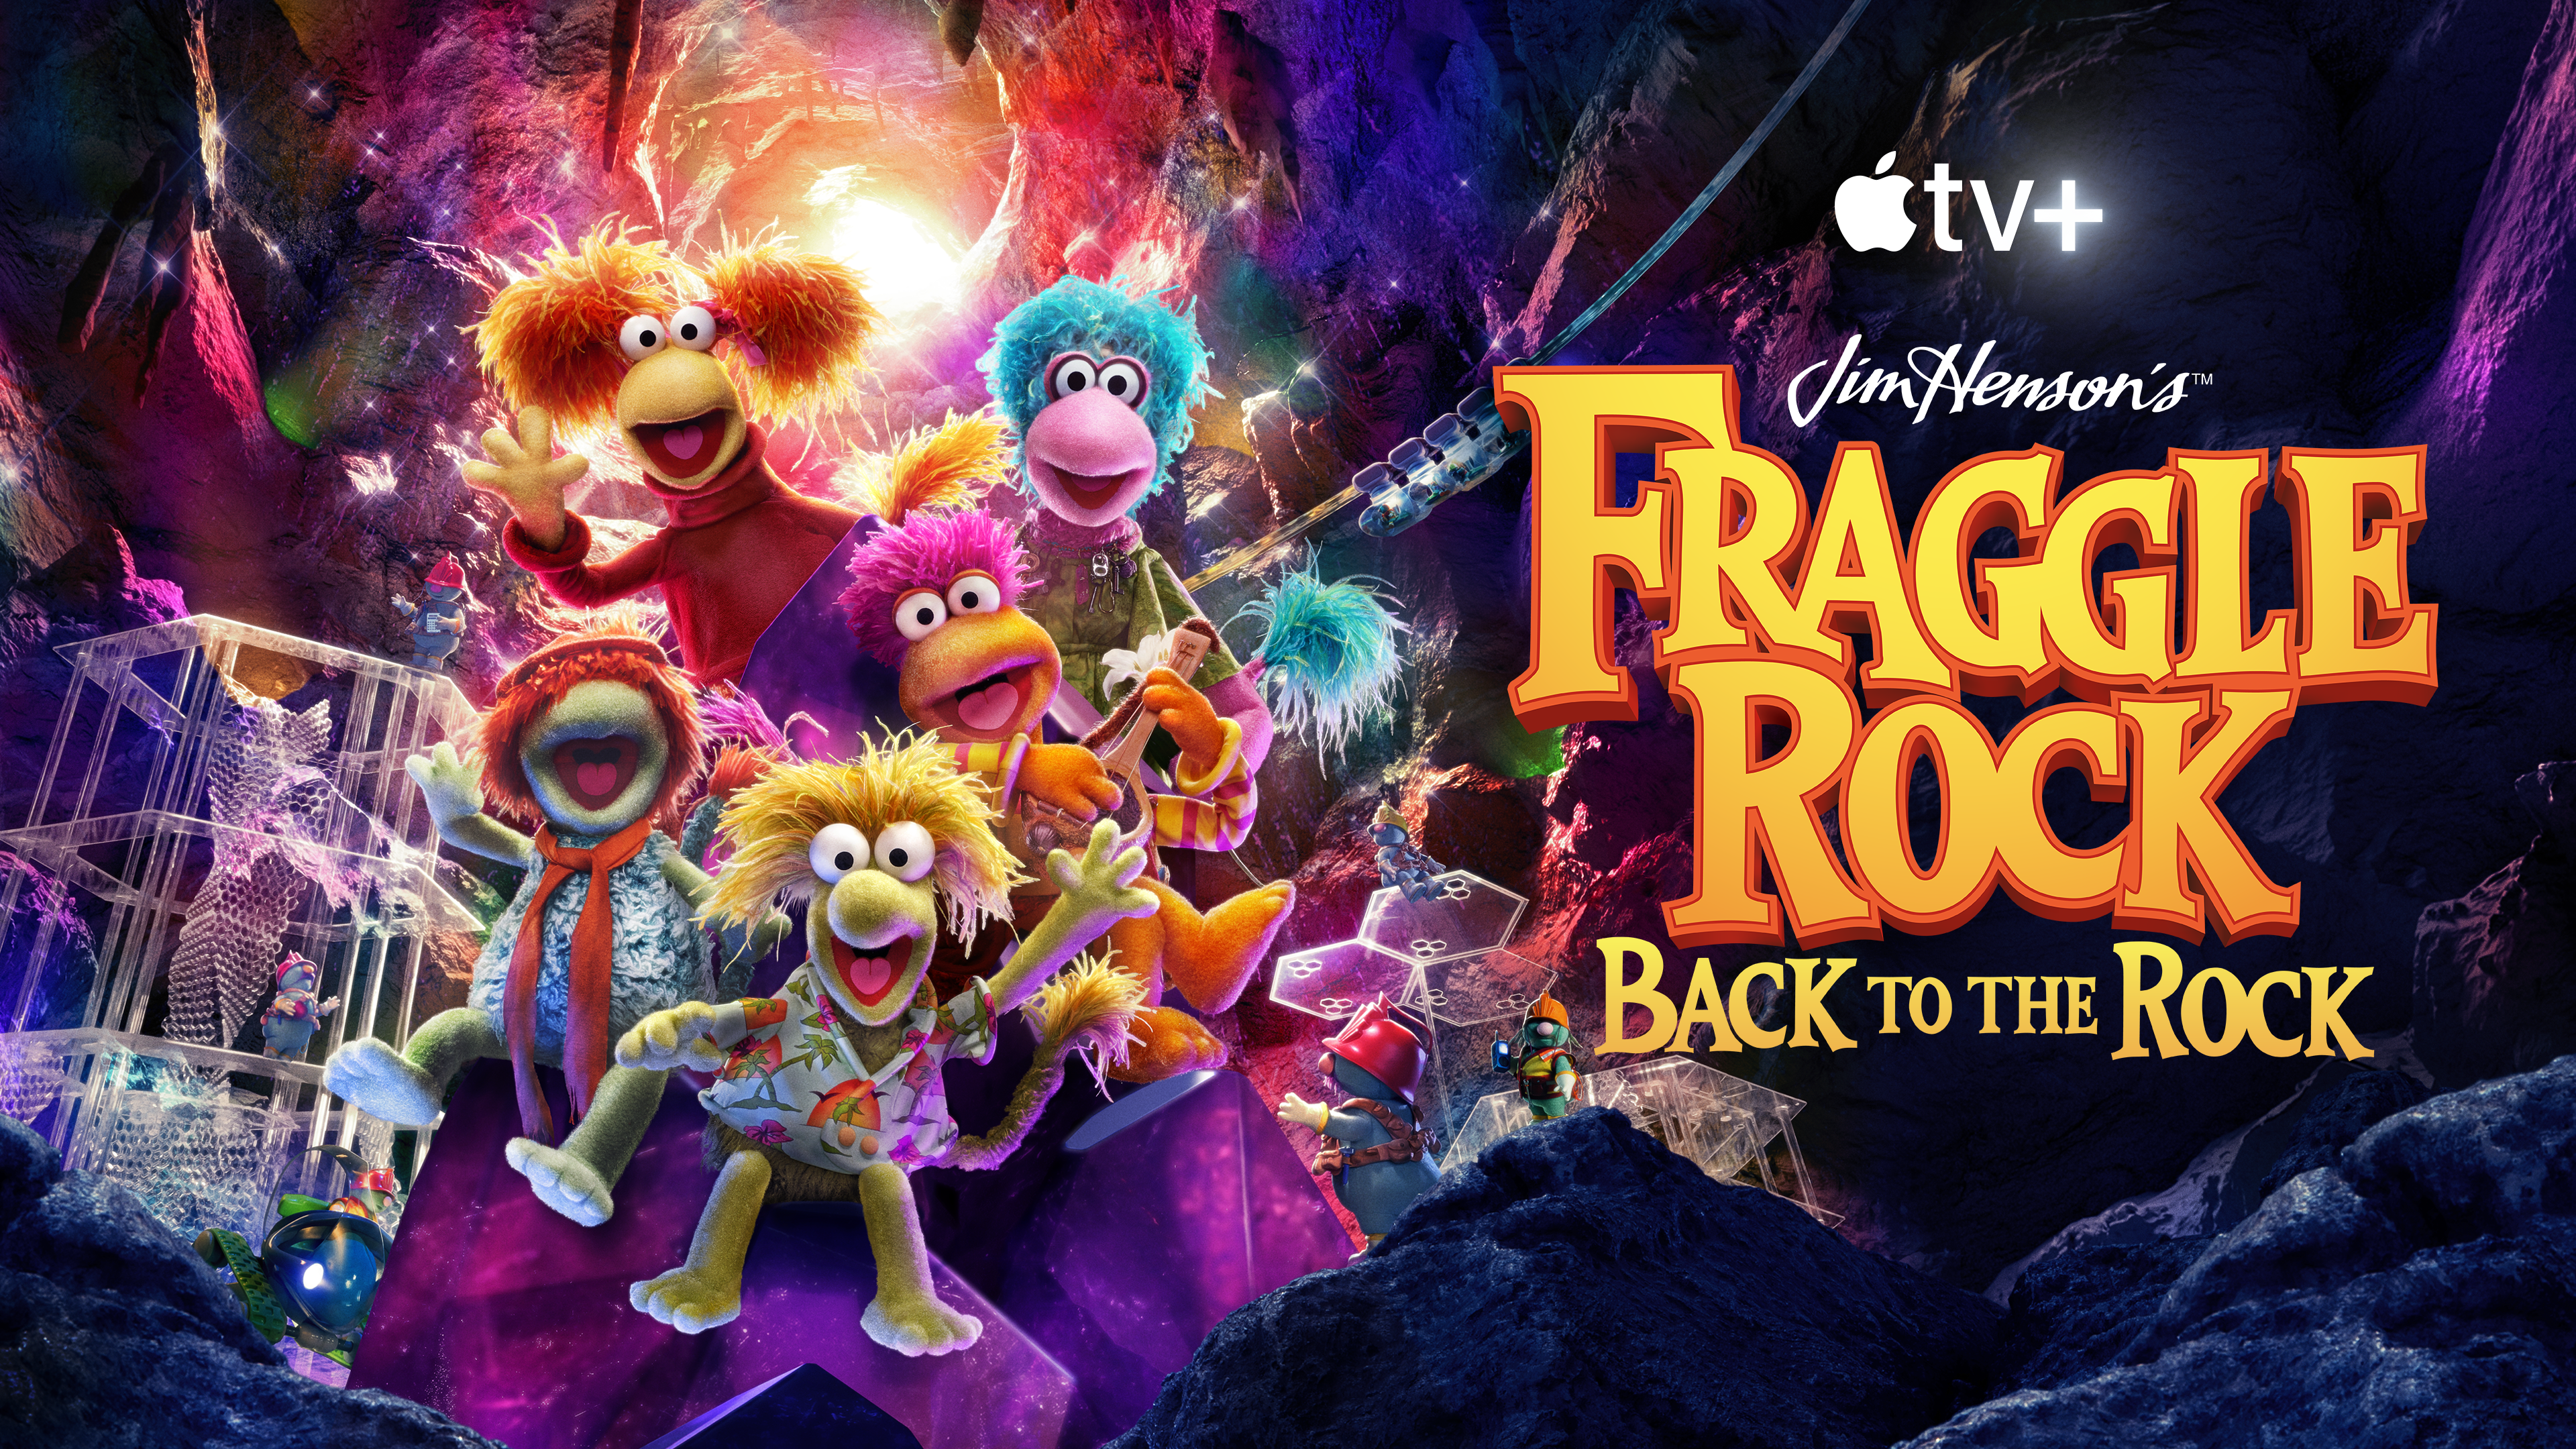 Fraggle Rock Back to the Rock Review